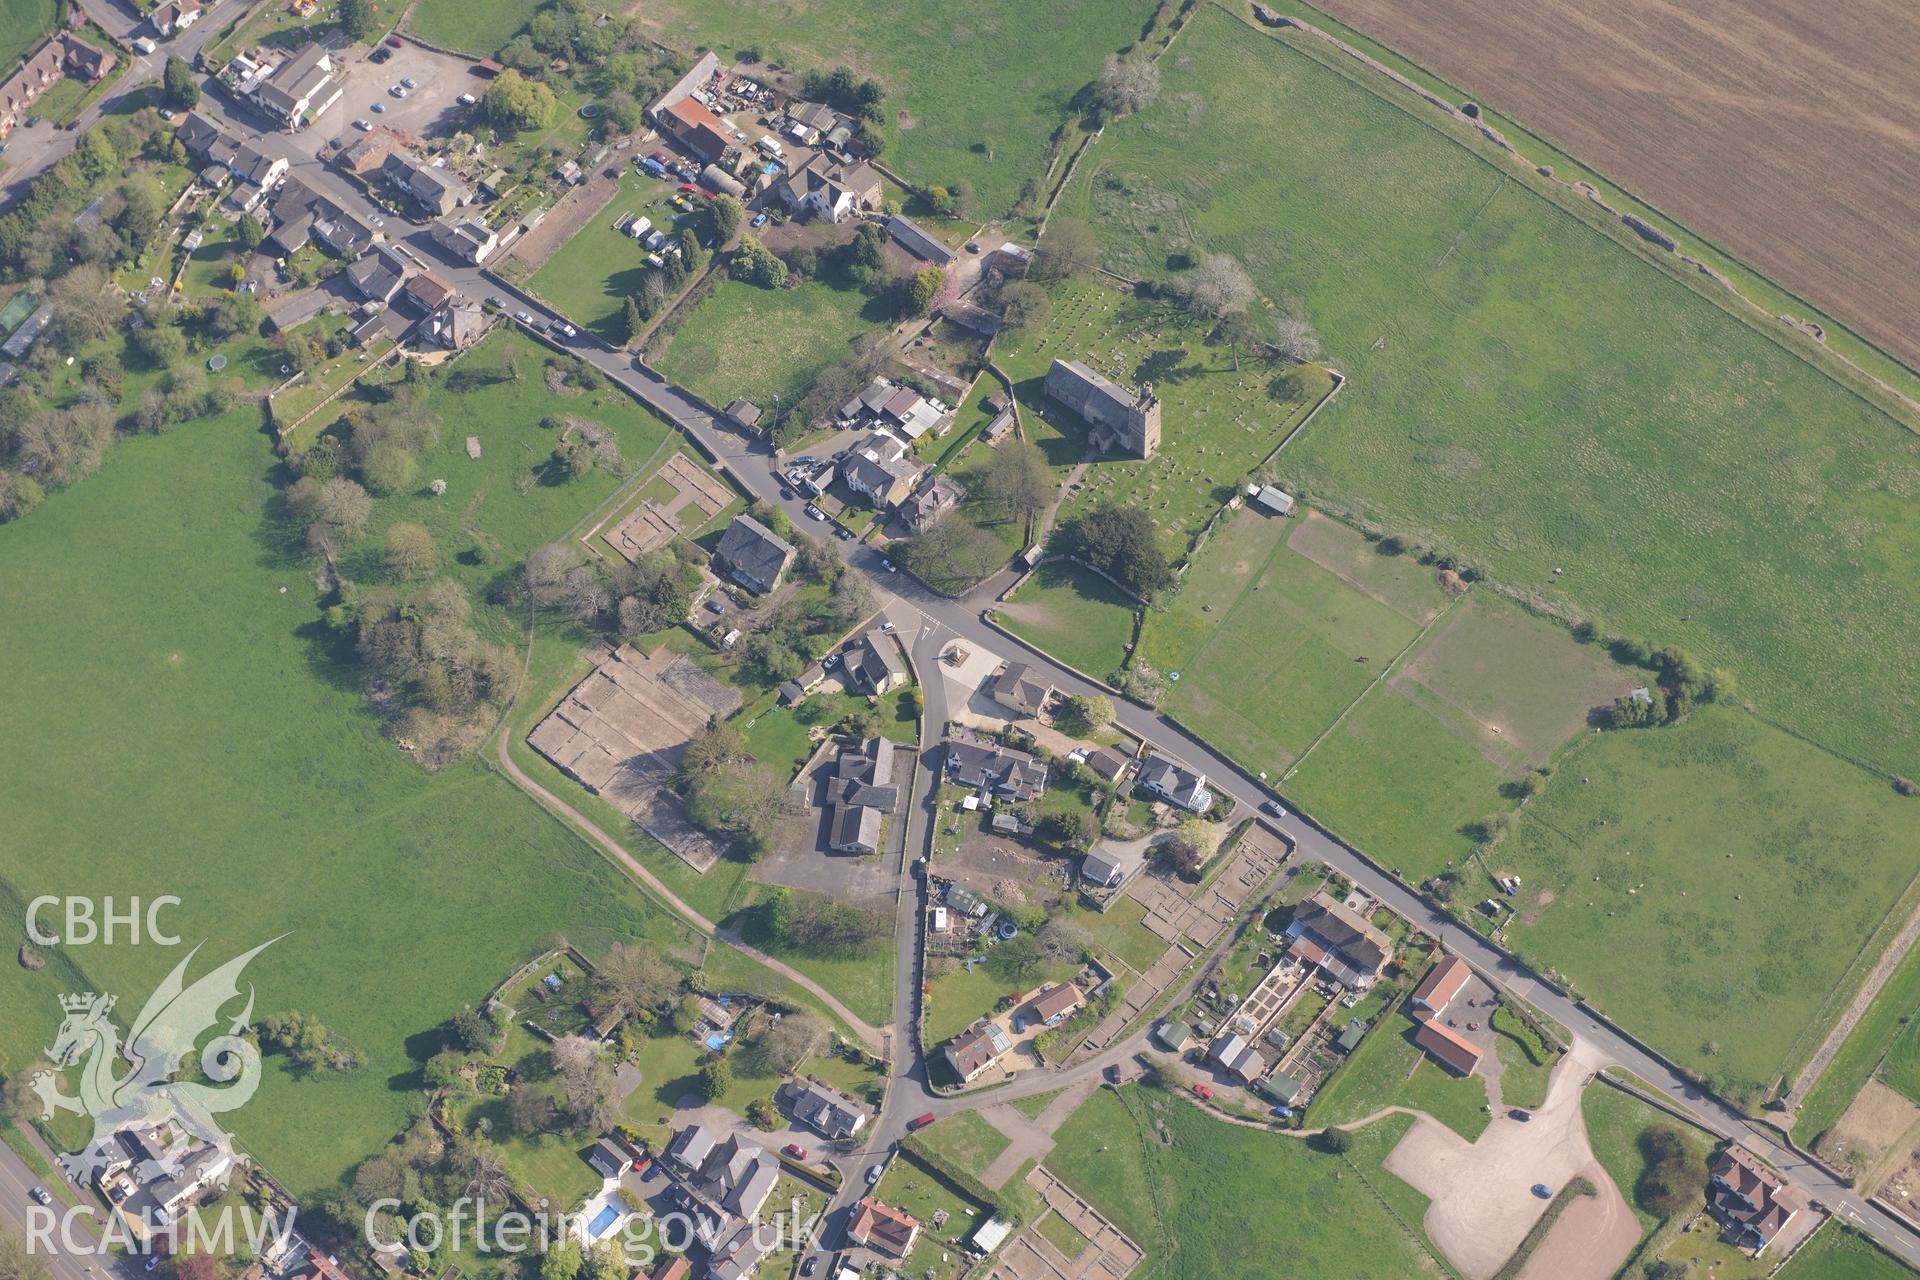 Caerwent village and Roman city including views of the Roman Amphitheatre and Basilica and Forum; St. Stephen's Church; Caerwent House; Great House and West Gate Farm. Oblique aerial photograph taken during the Royal Commission's programme of archaeological aerial reconnaissance by Toby Driver on 21st April 2015.